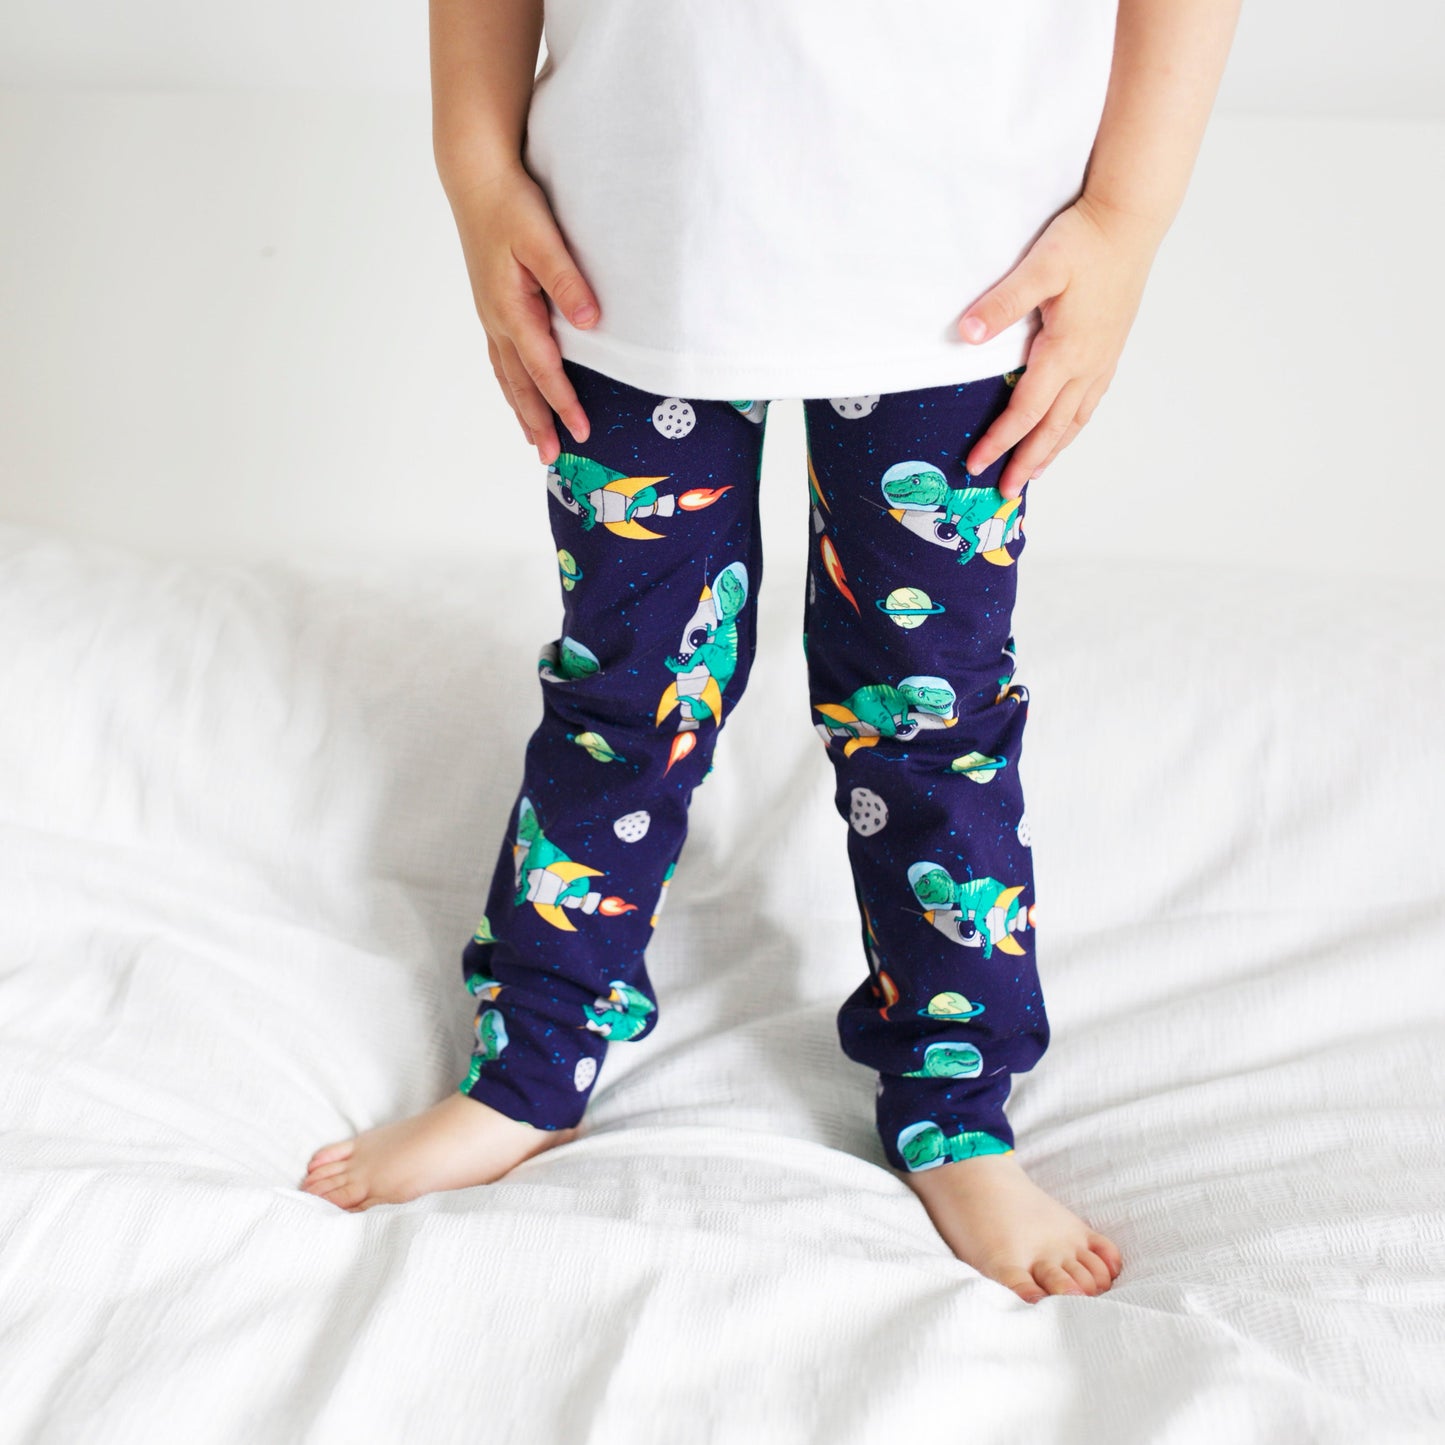 Load image into Gallery viewer, Space Rex Leggings
